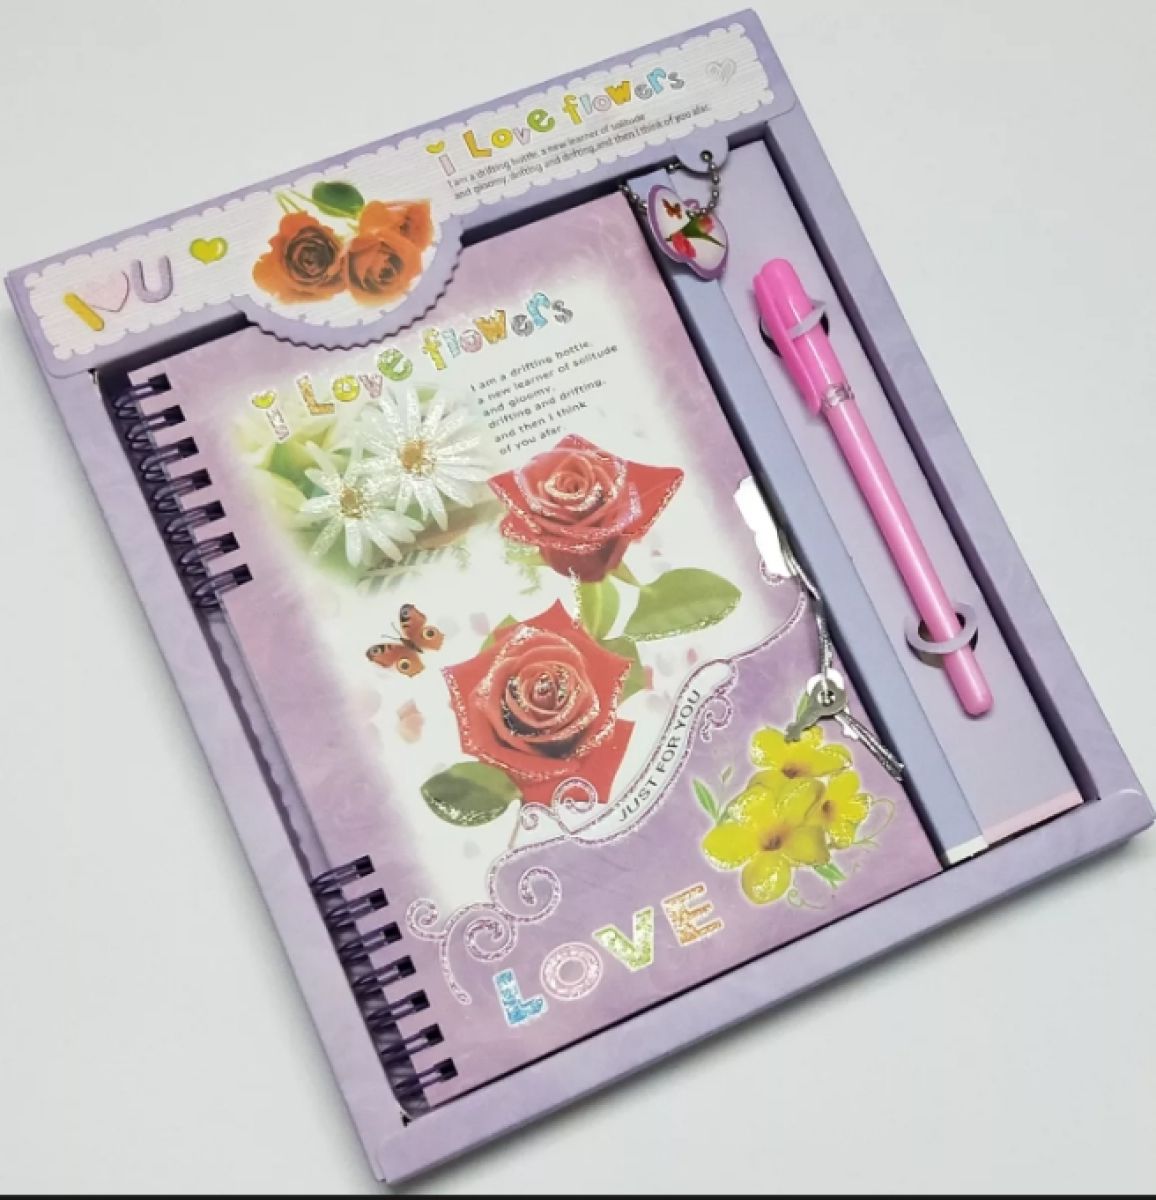 Fancy Lock Flower Binding Diary Medium Size With Box And Gift Pen Pages 62 Size 20x24 Cm Printed Diary Special Gift For Boys And Girls